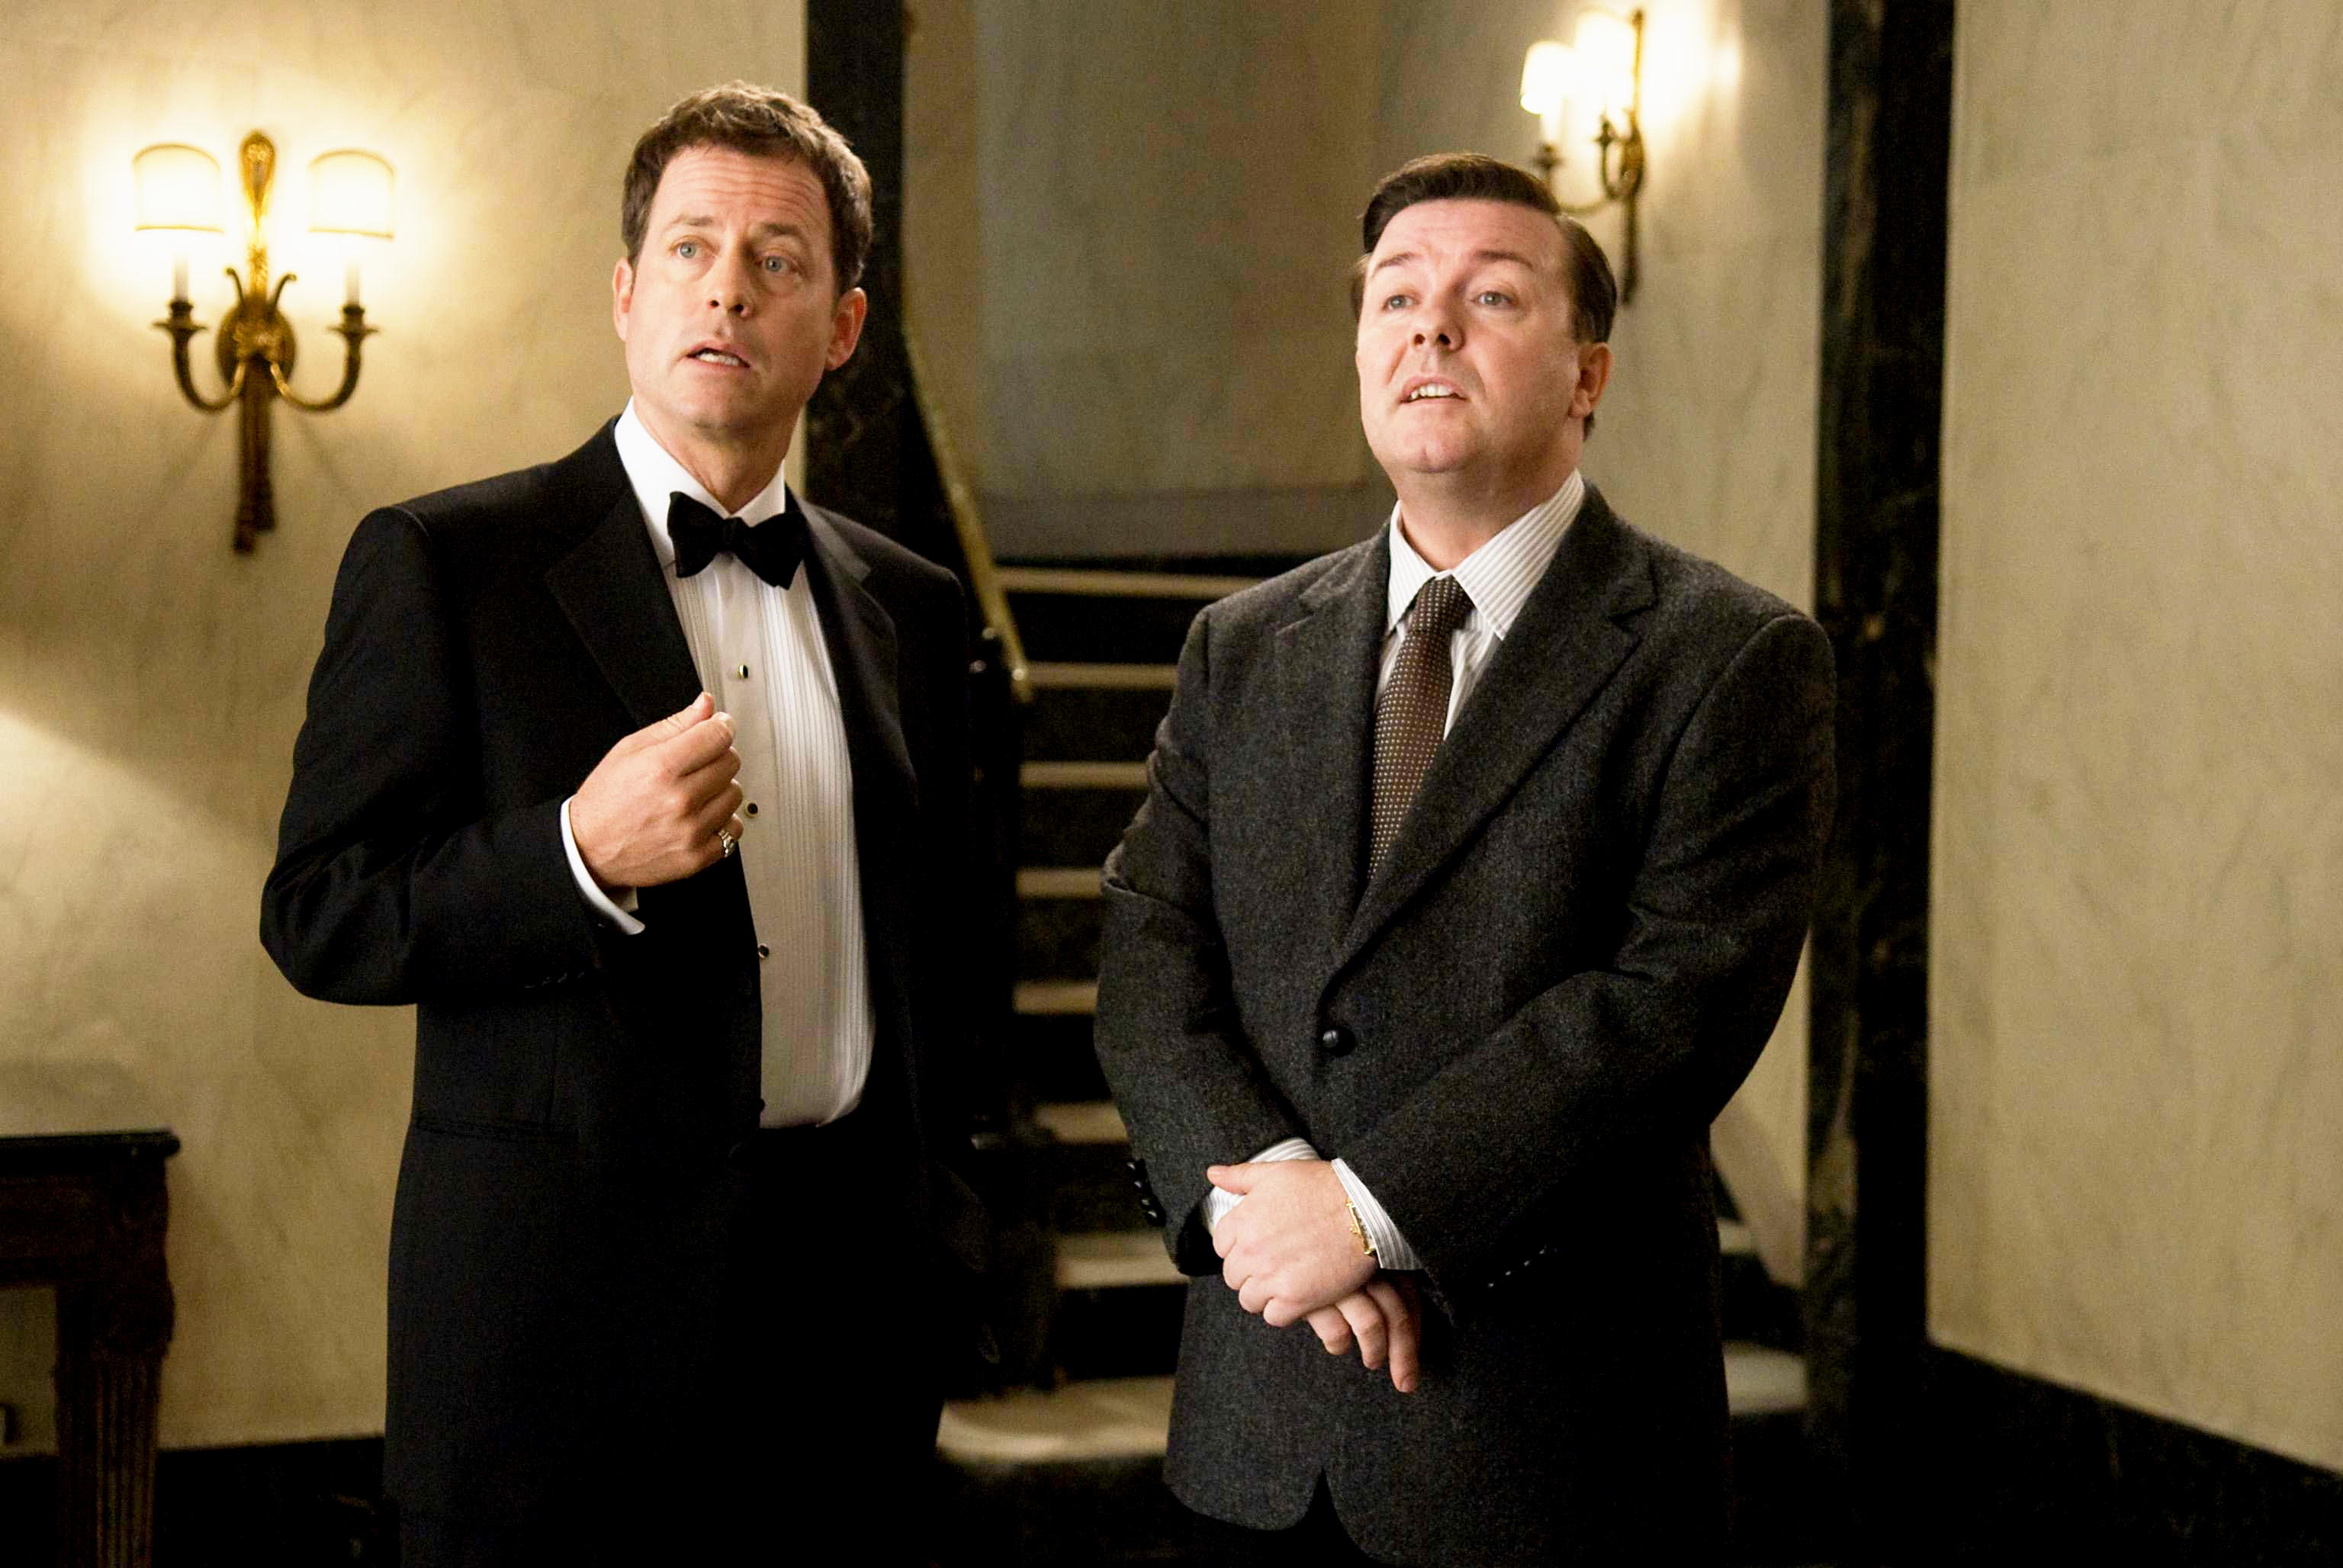 Greg Kinnear stars as Frank Herlihy and Ricky Gervais stars as Bertram Pincus in Paramount Pictures' Ghost Town (2008)